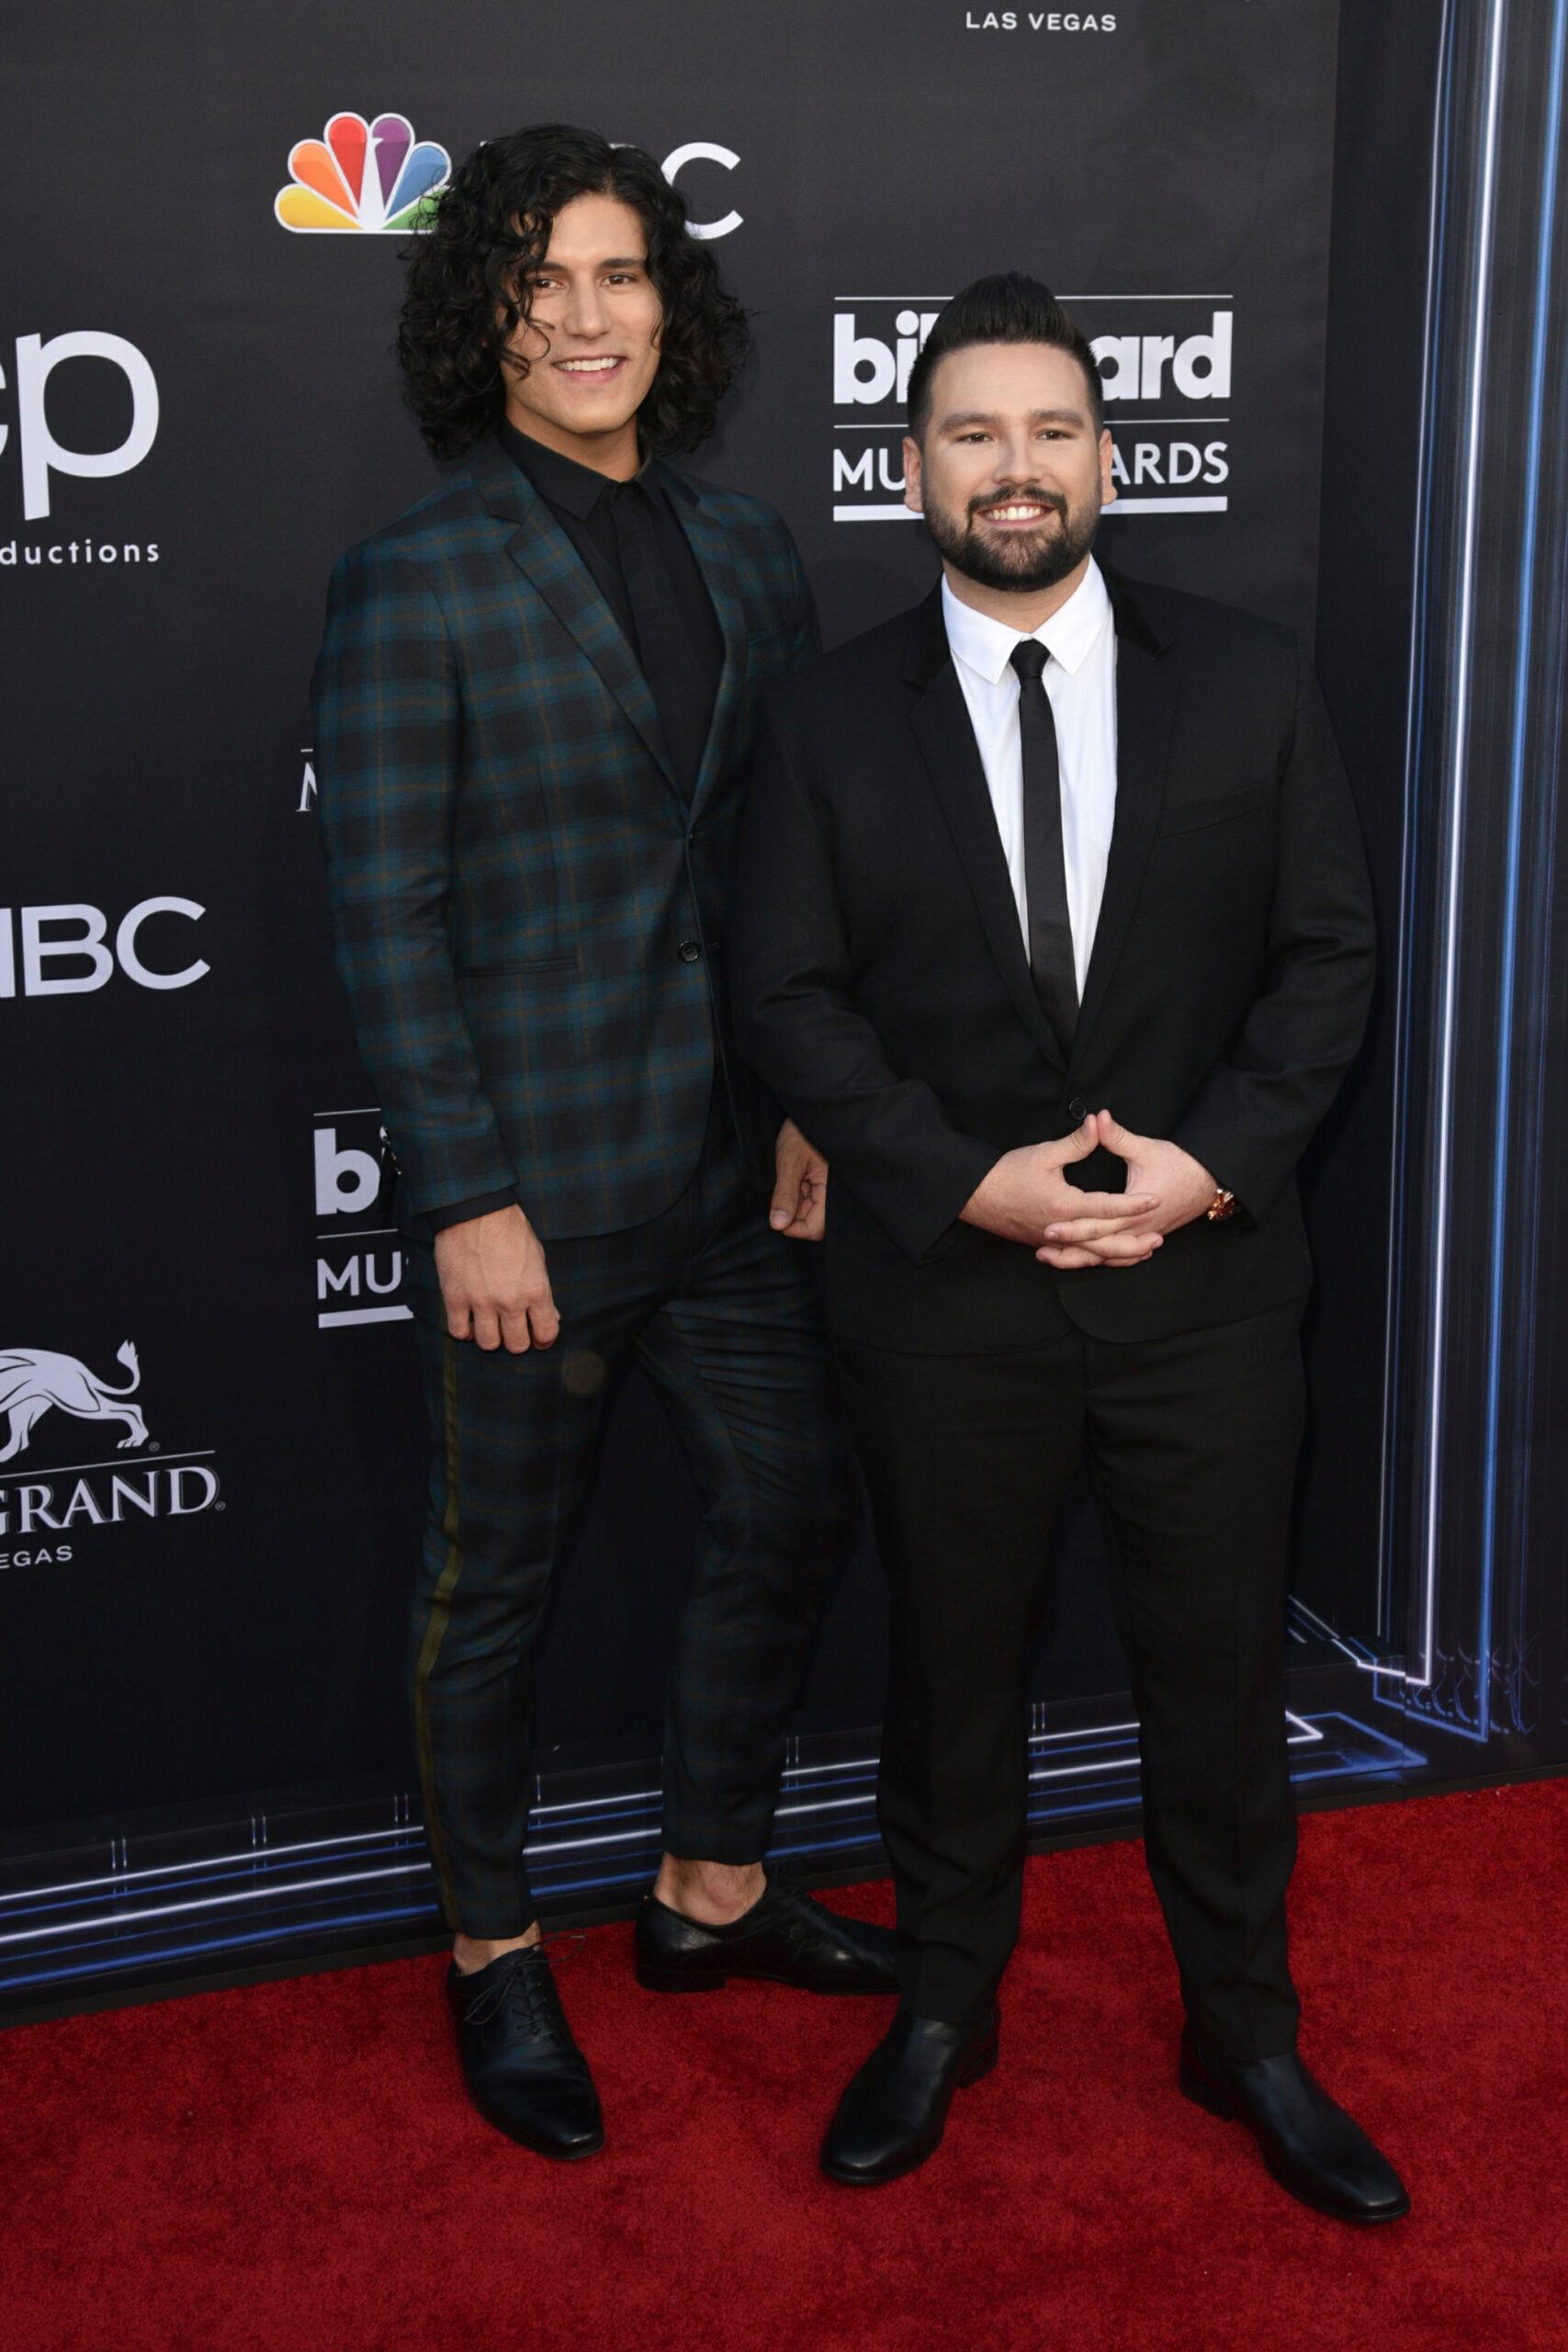 Dan and Shay 2019 Billboard Music Awards, Arrivals 54th Annual ACM Awards Arrivals, Grand Garden Arena, Las Vegas, USA - 01 May 2019.